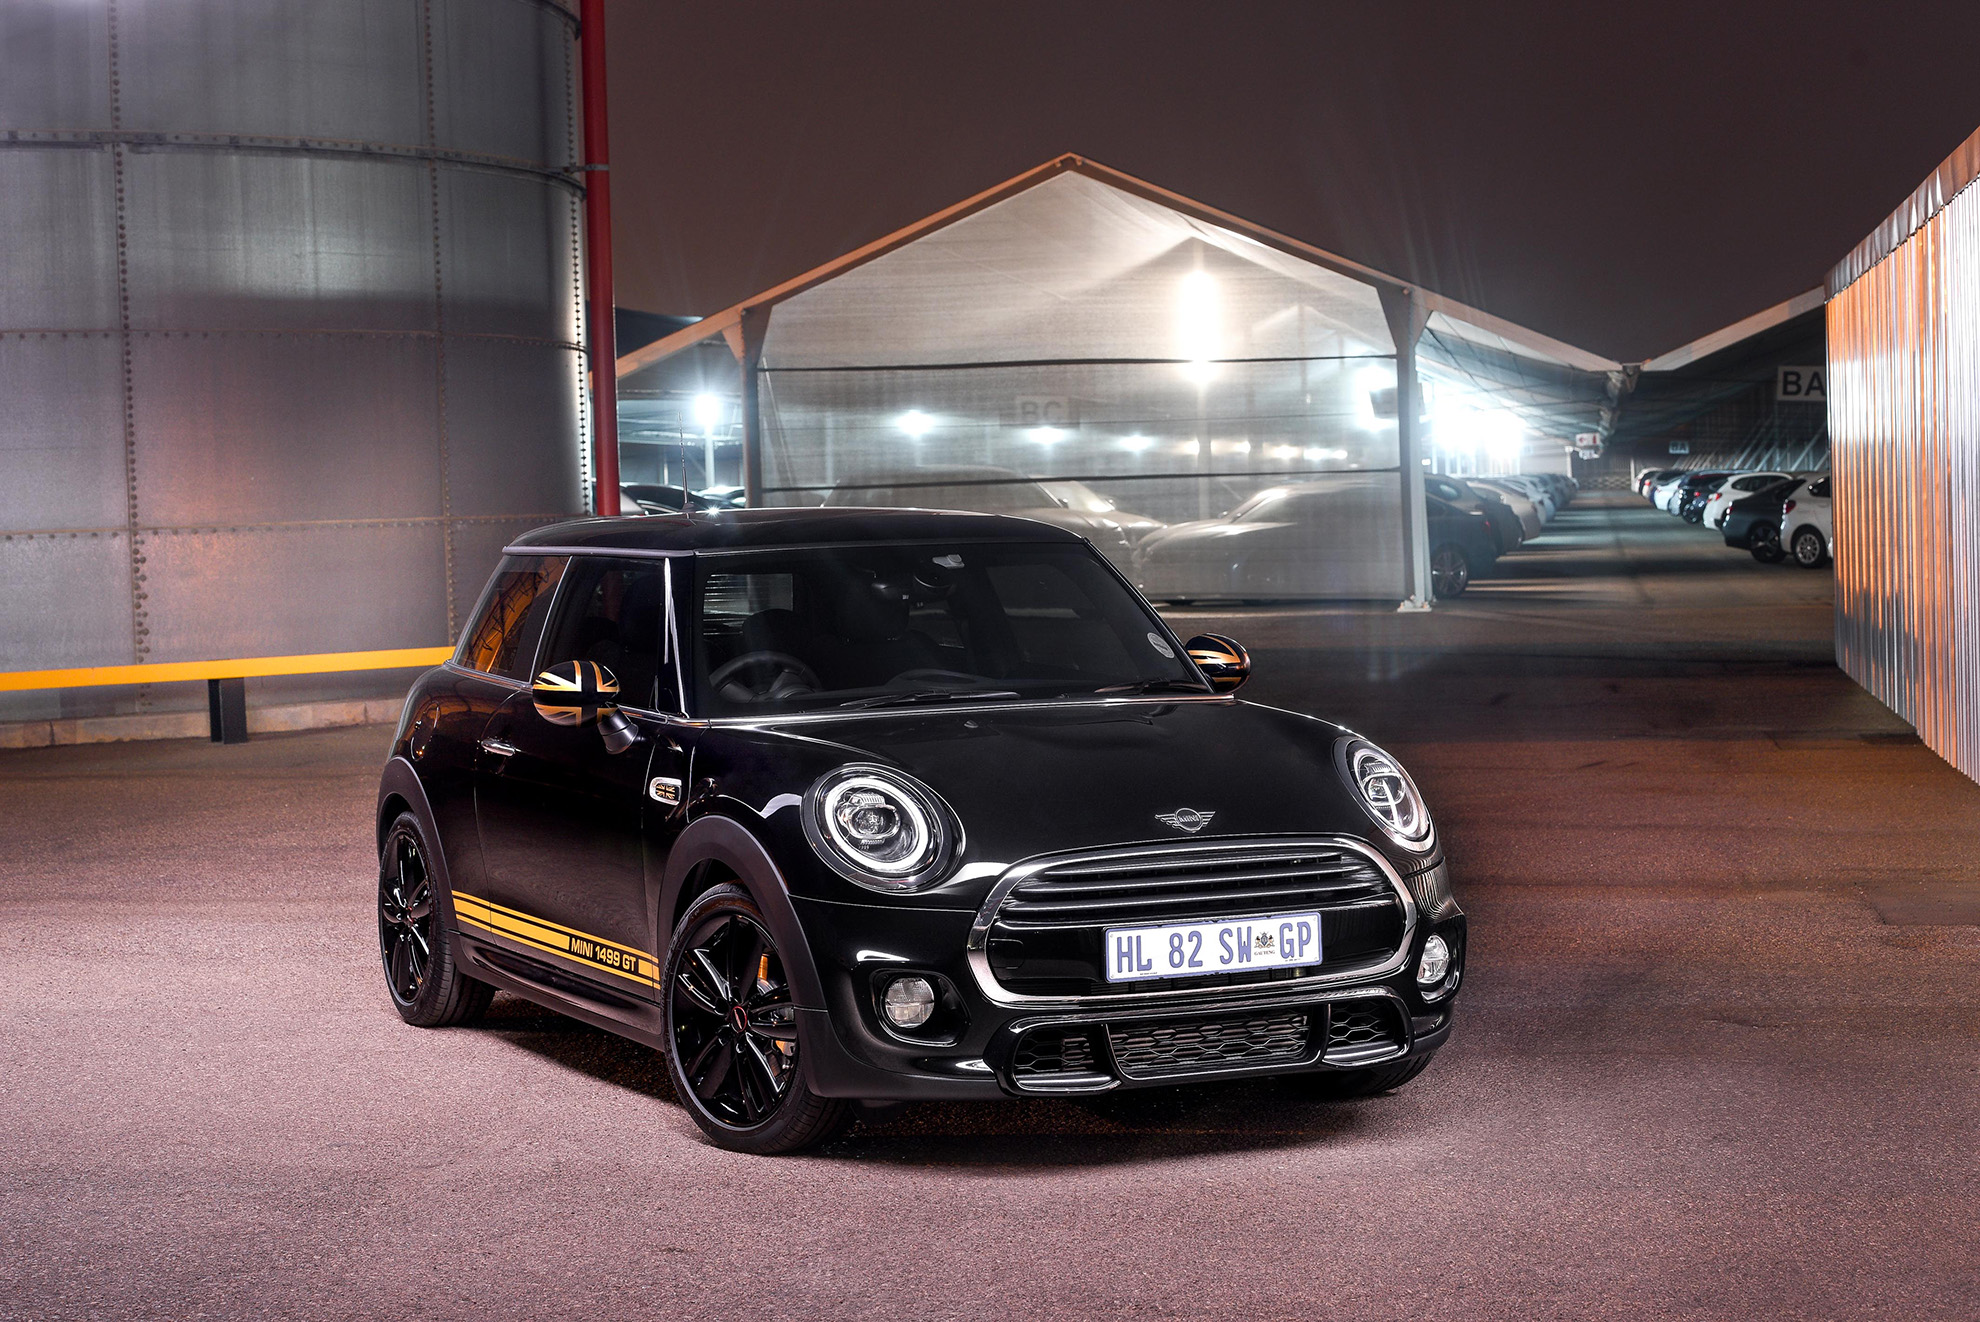 MINI at the 2018 South African Festival of Motoring.